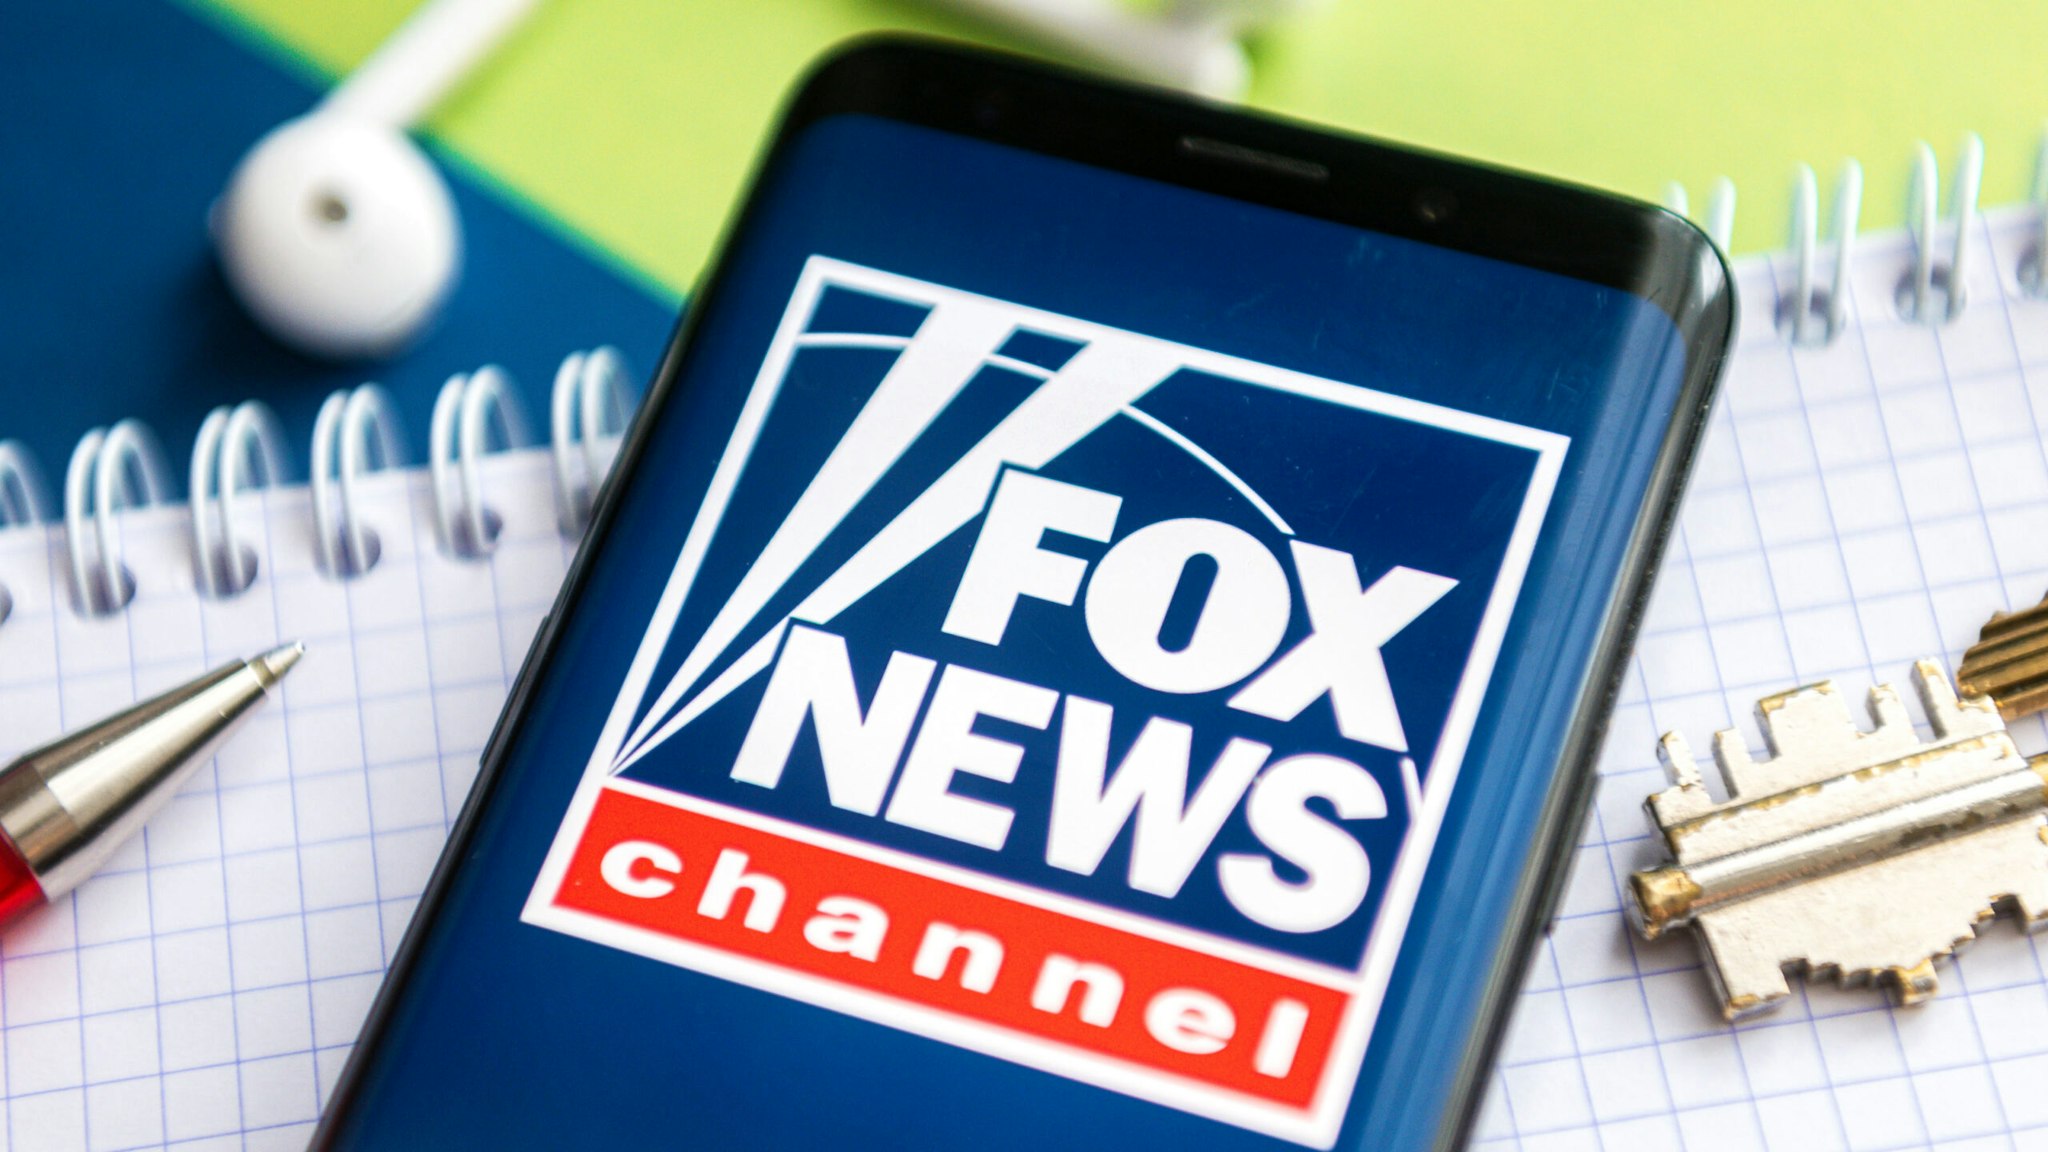 POLAND - 2021/02/09: In this photo illustration, a Fox News logo seen displayed on a smartphone with a pen, key, book and headsets in the background.